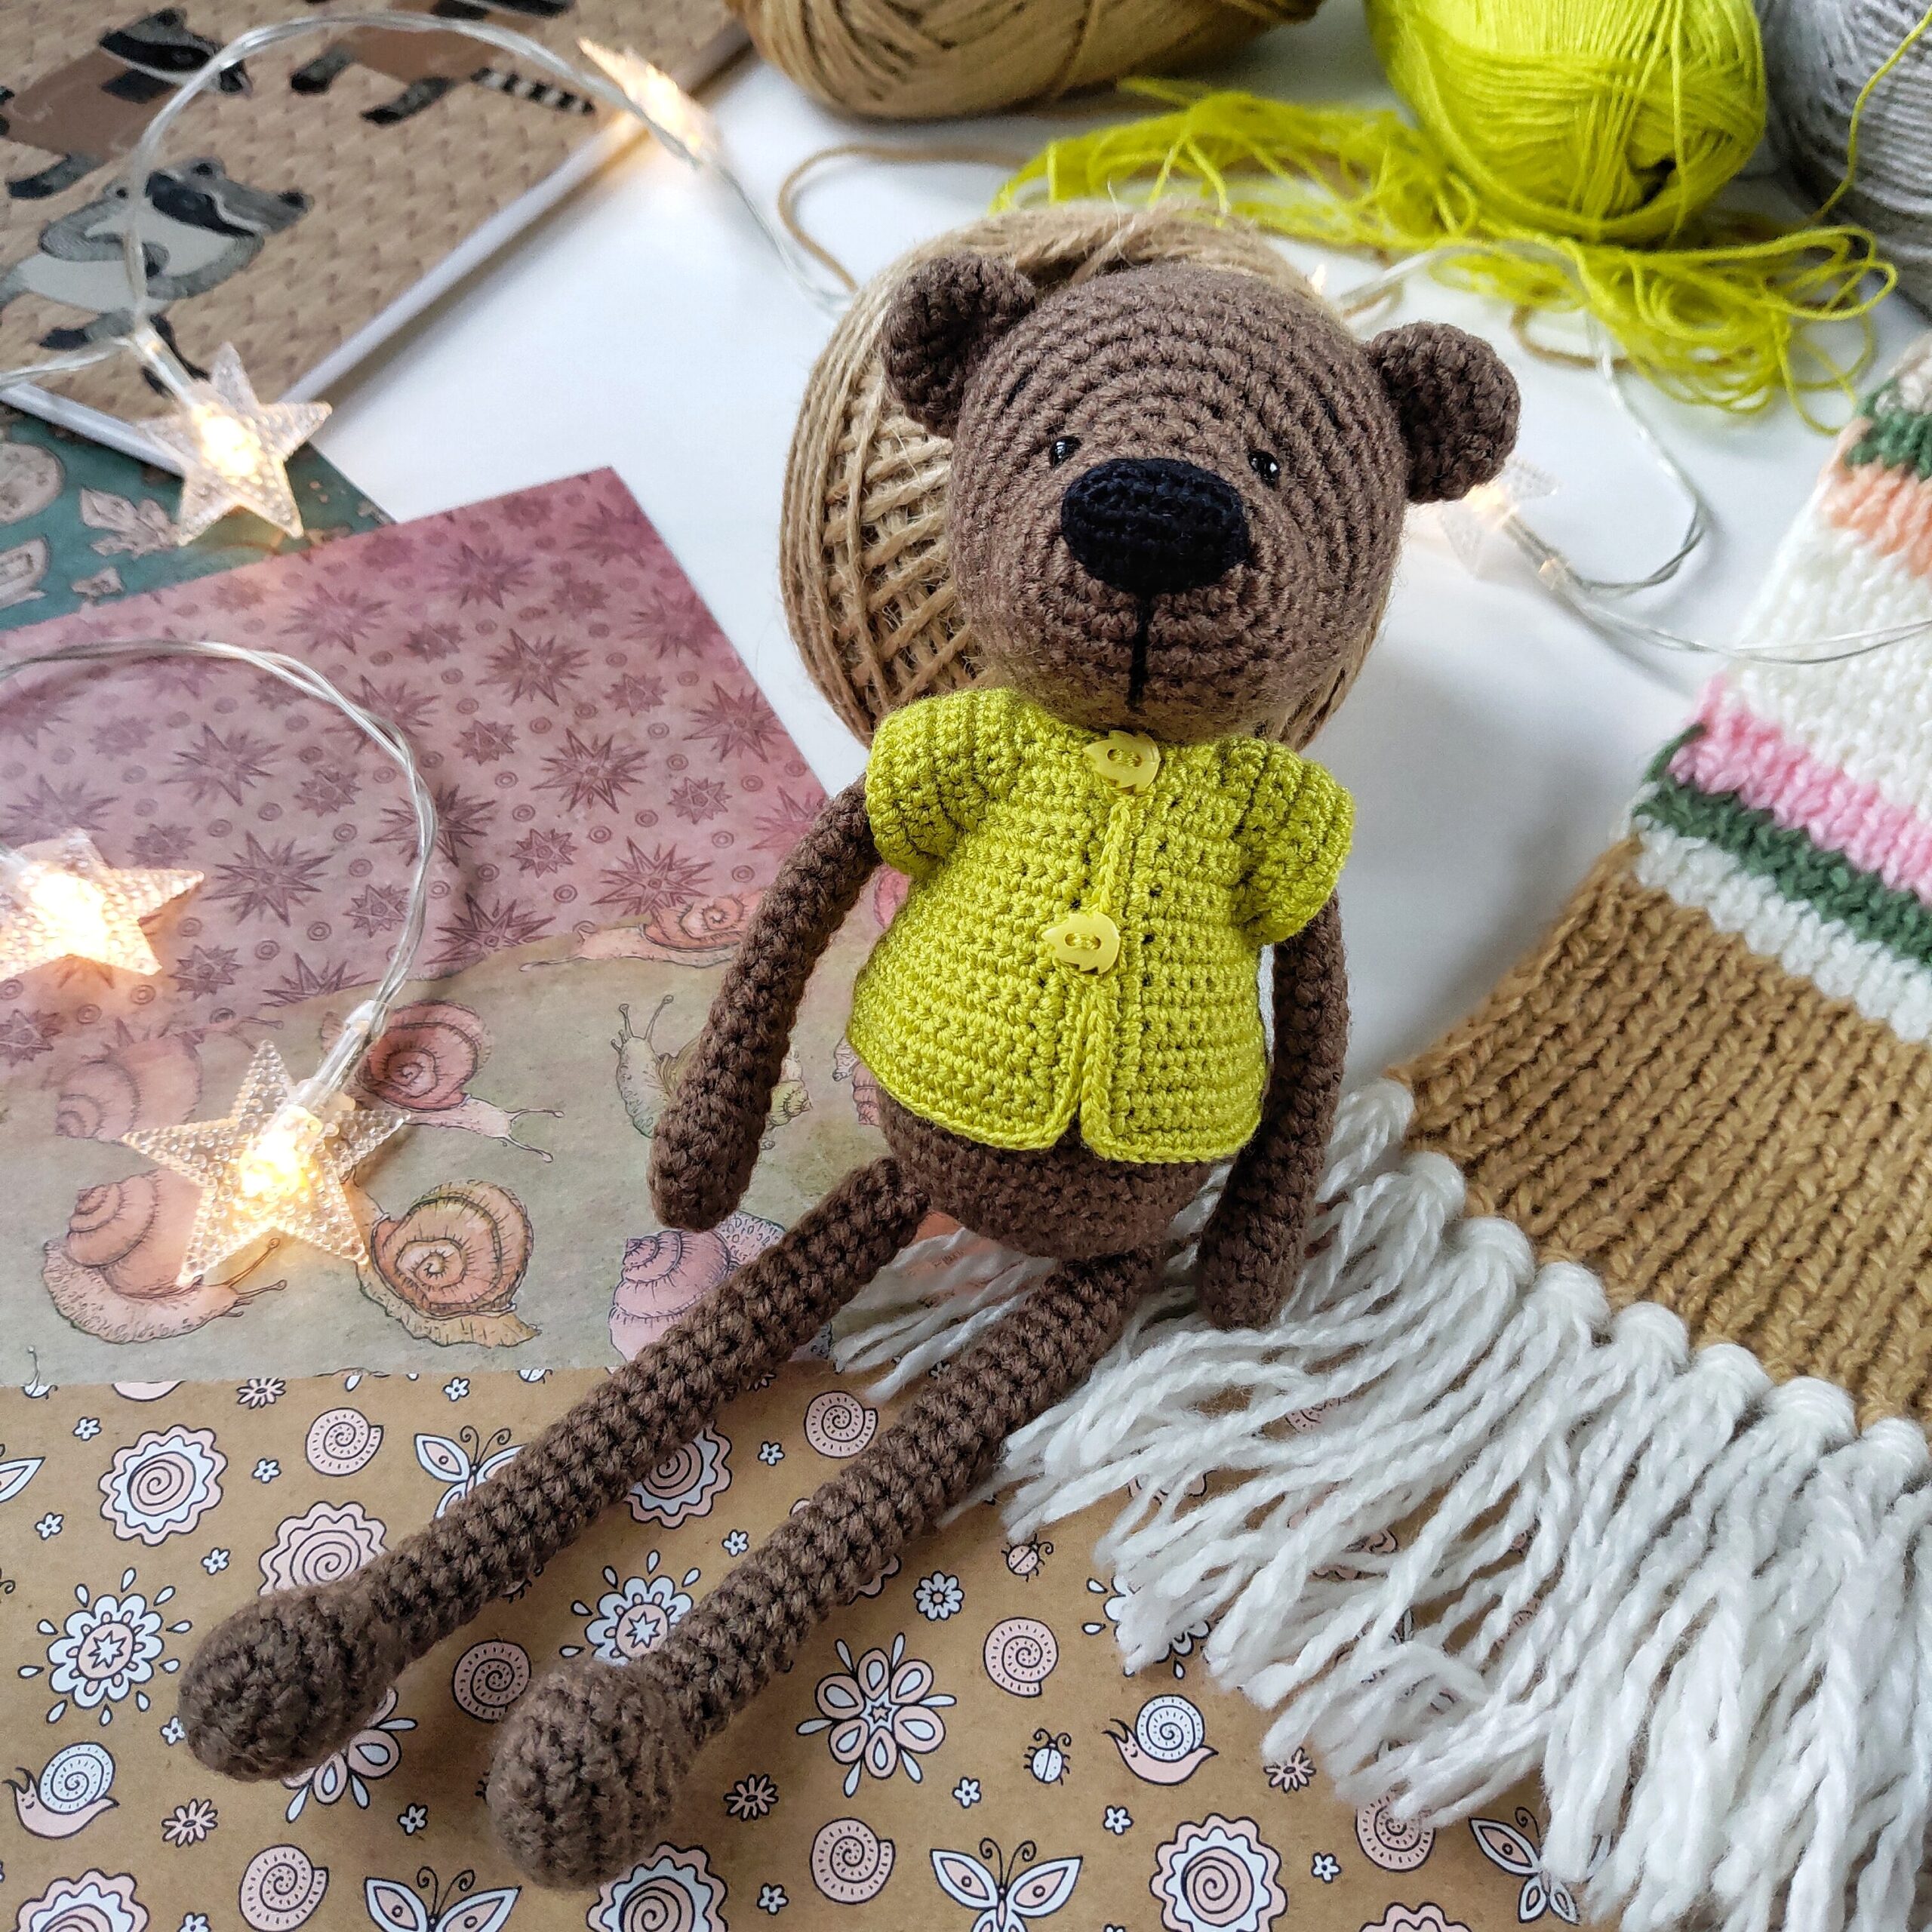 How to Crochet a Cardigan for a Stuffed Animal